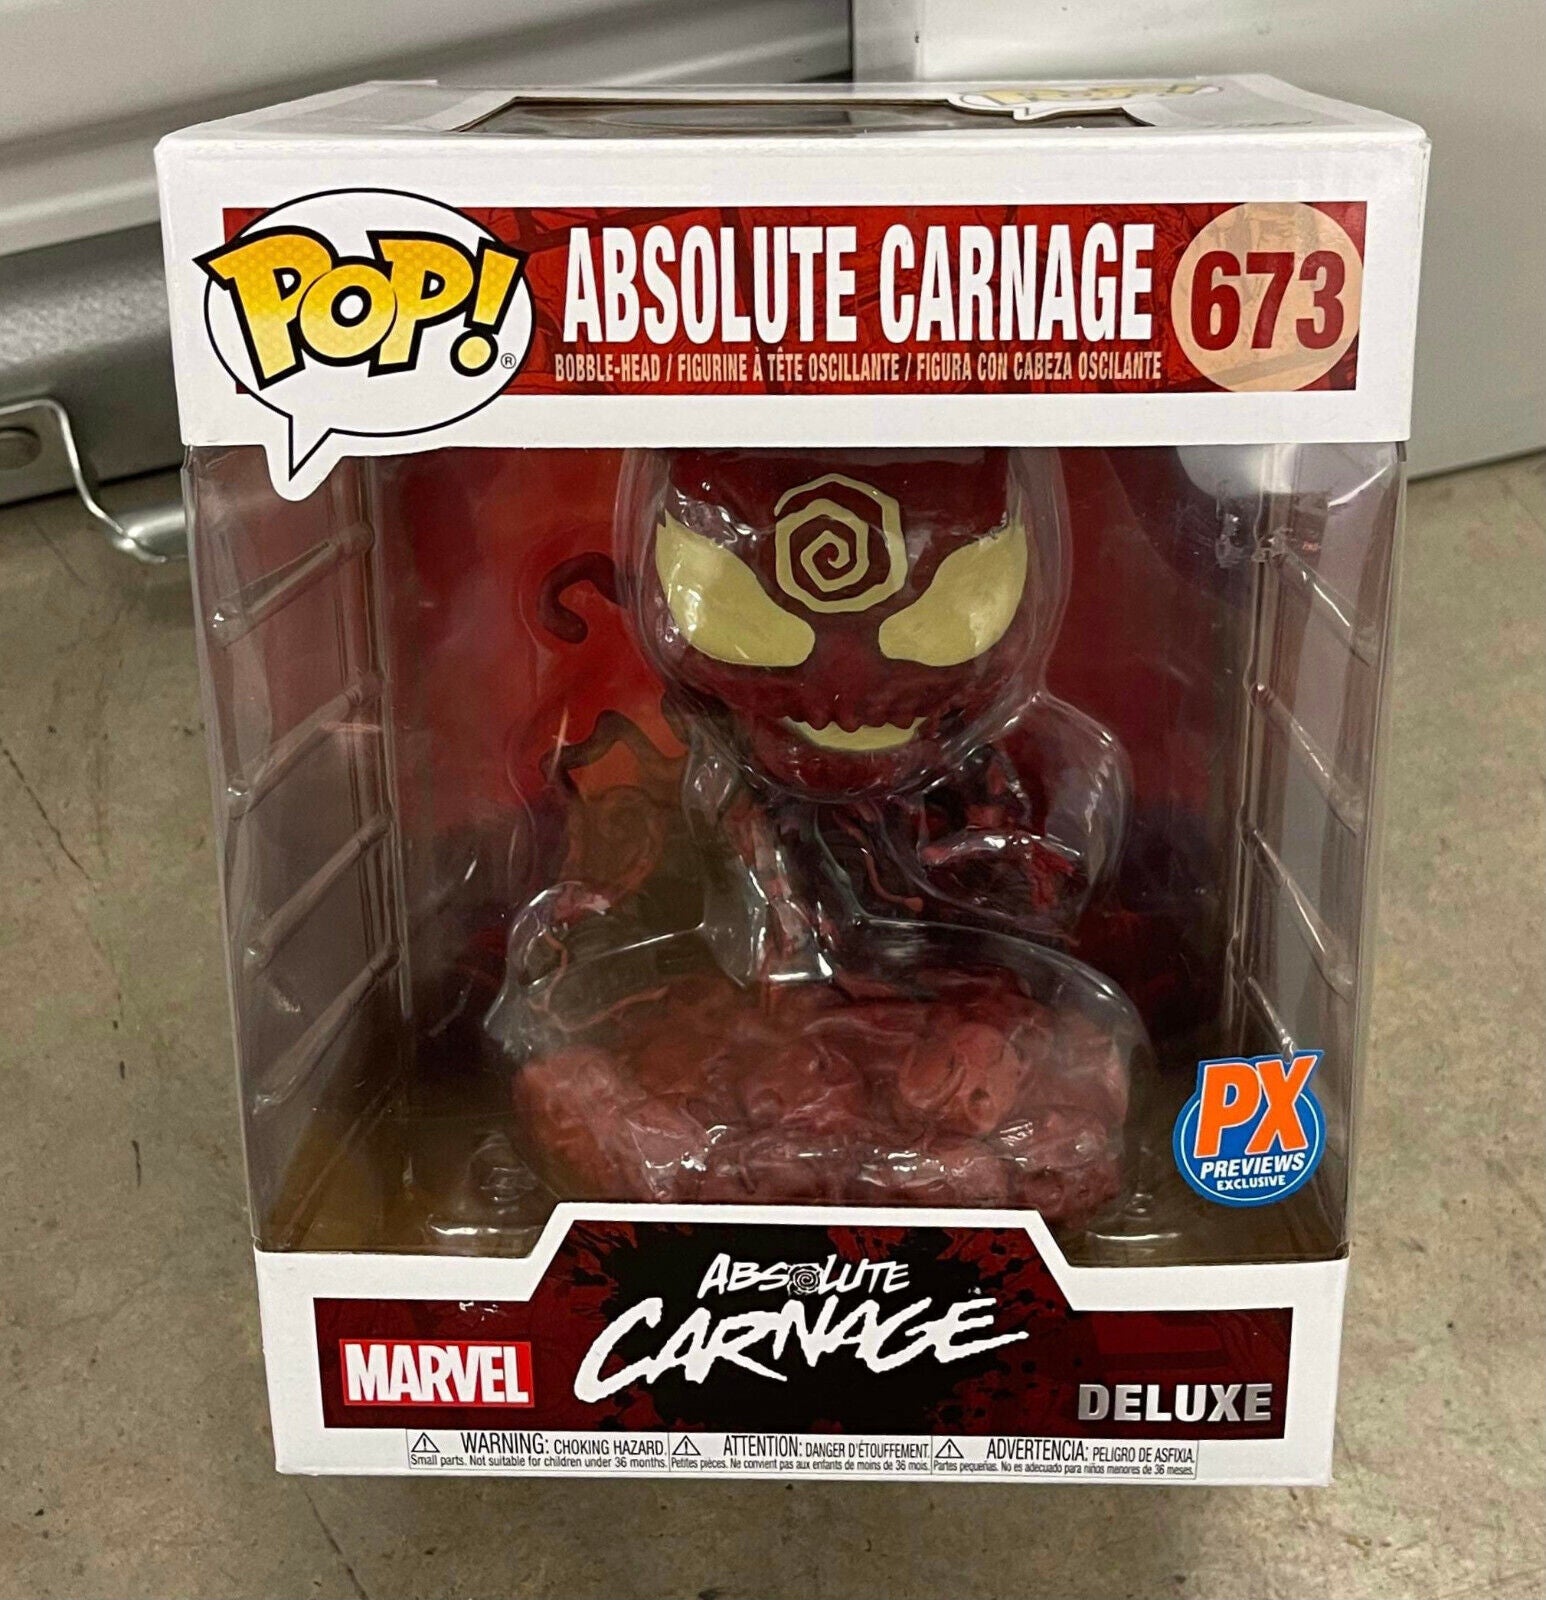 Marvel Heroes Absolute Carnage #673 PX Deluxe Funko Pop Figure